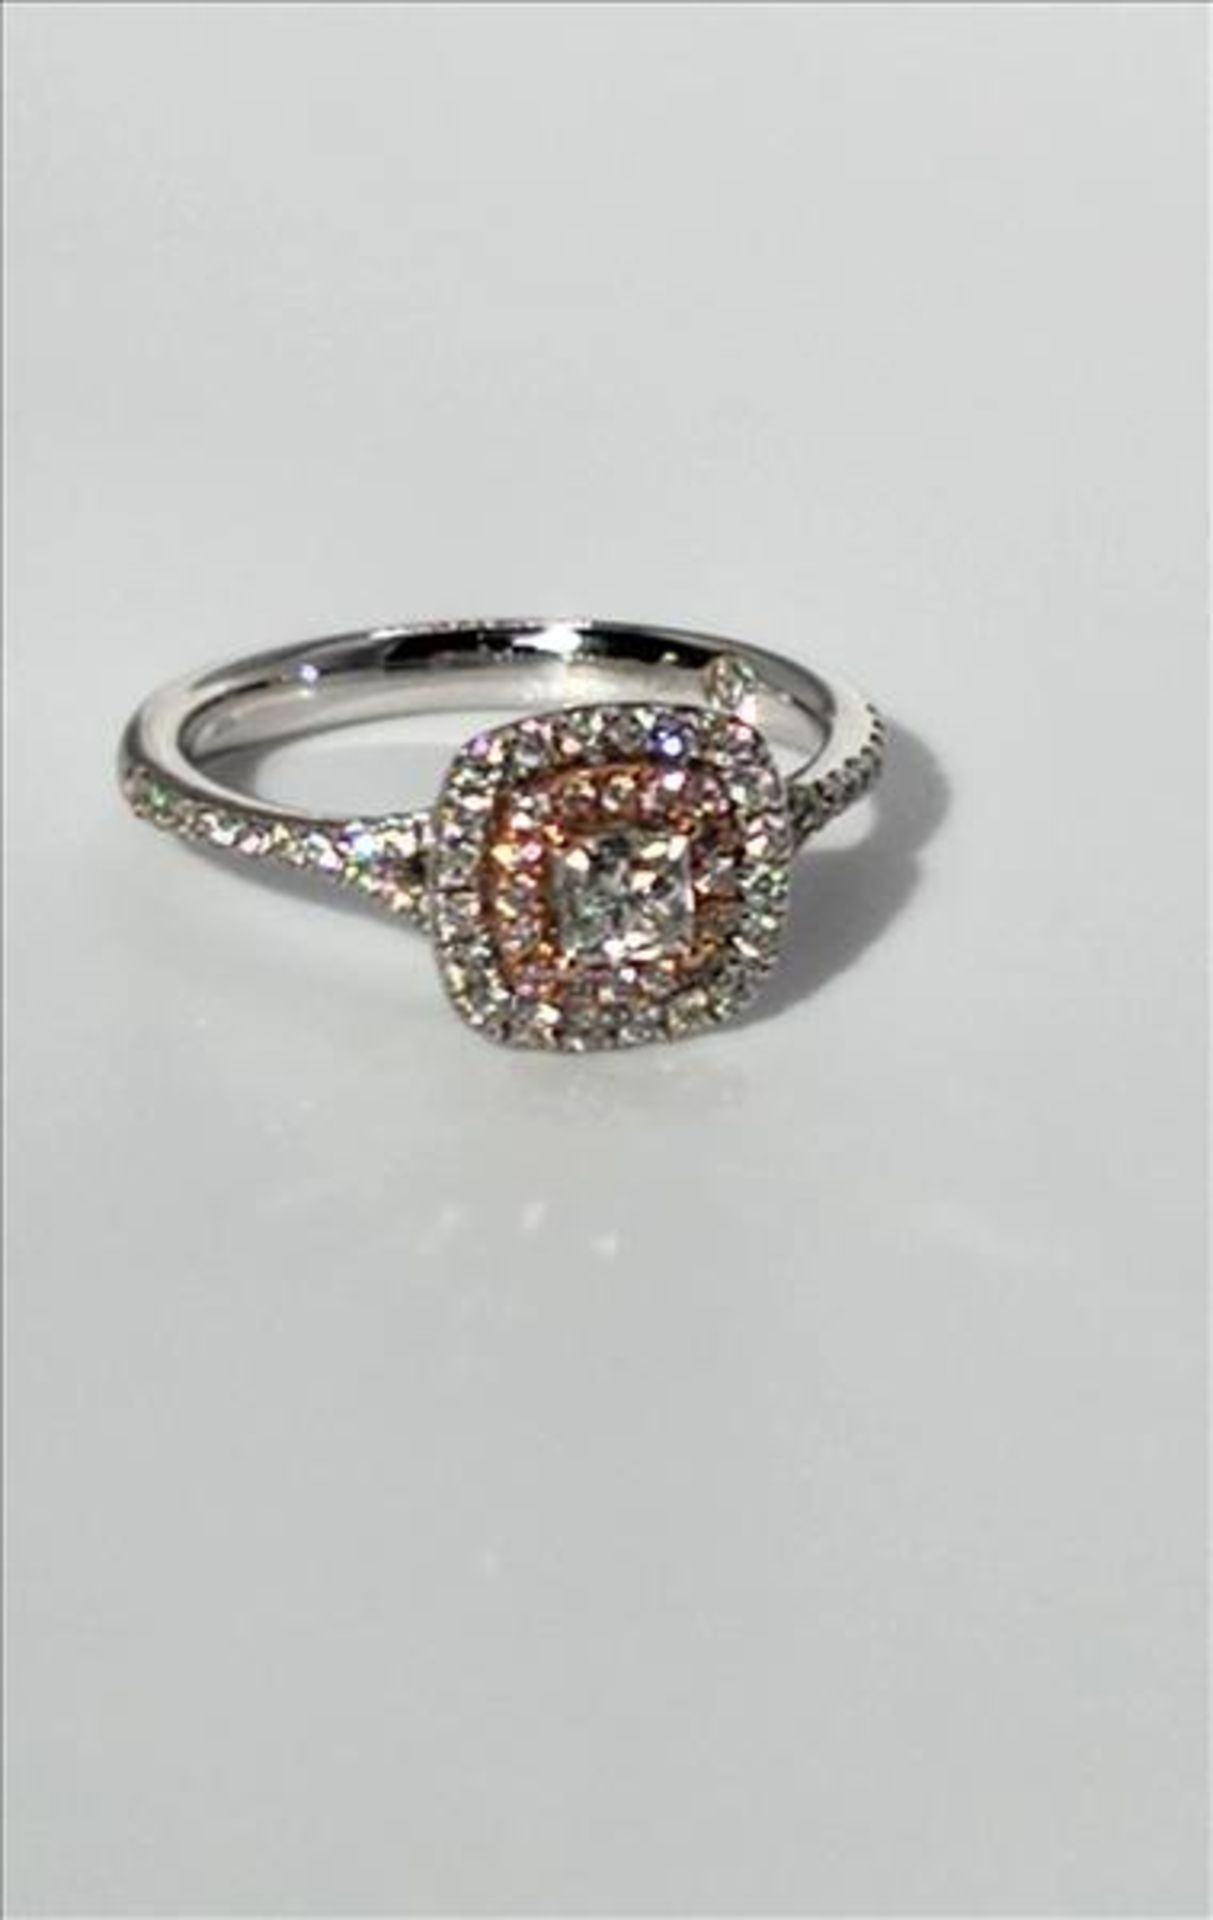 One lady’s stamped and tested 14kt white and pink gold diamond ring trademarked “Charmed” design